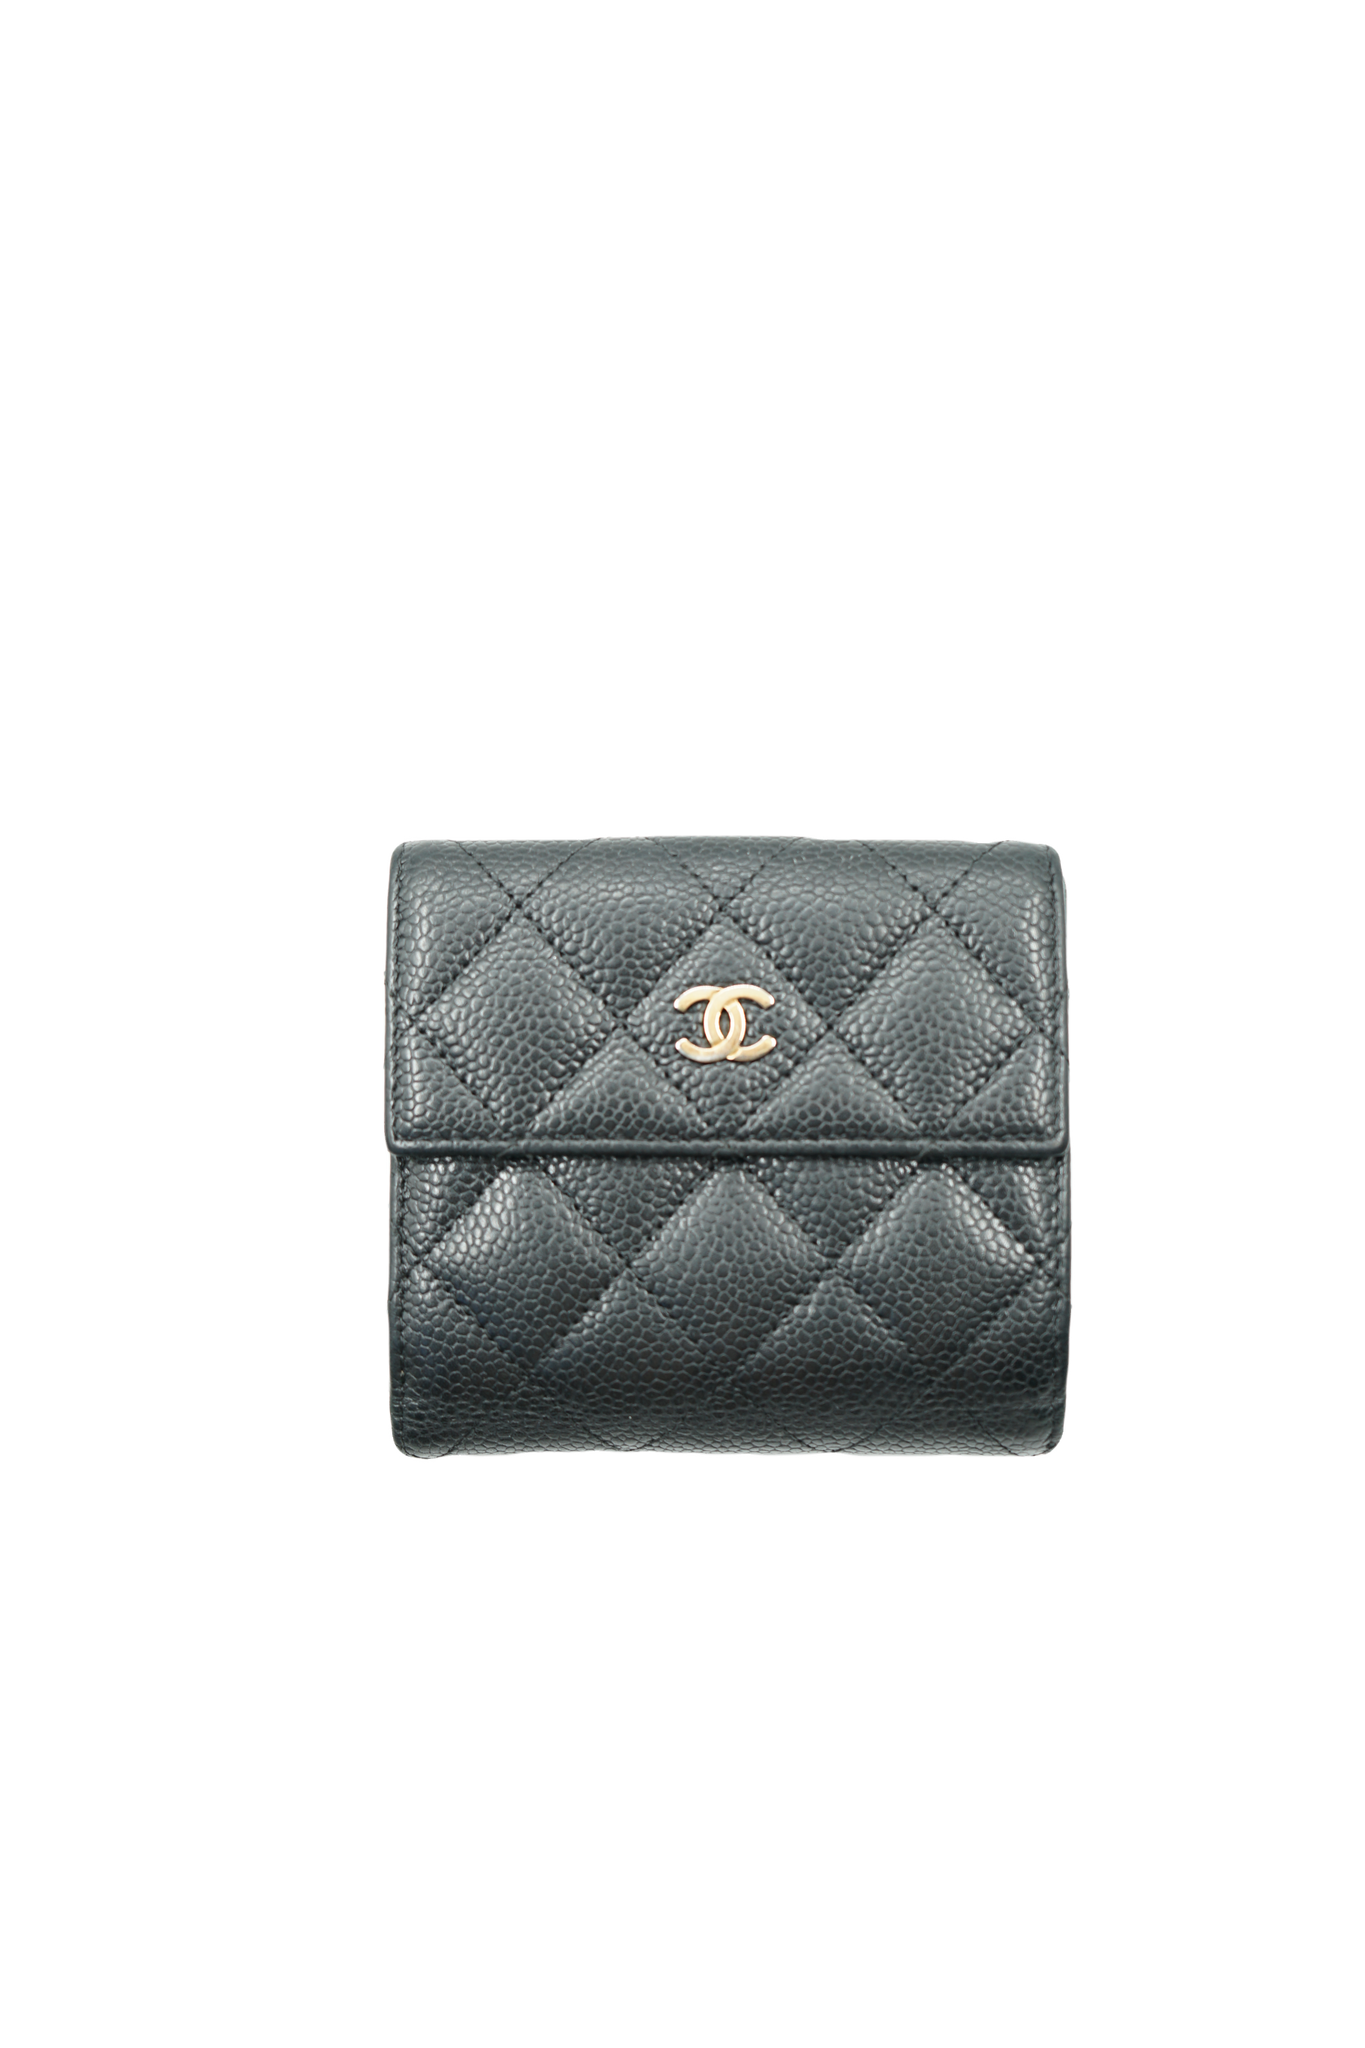 Chanel wallet in caviar leather